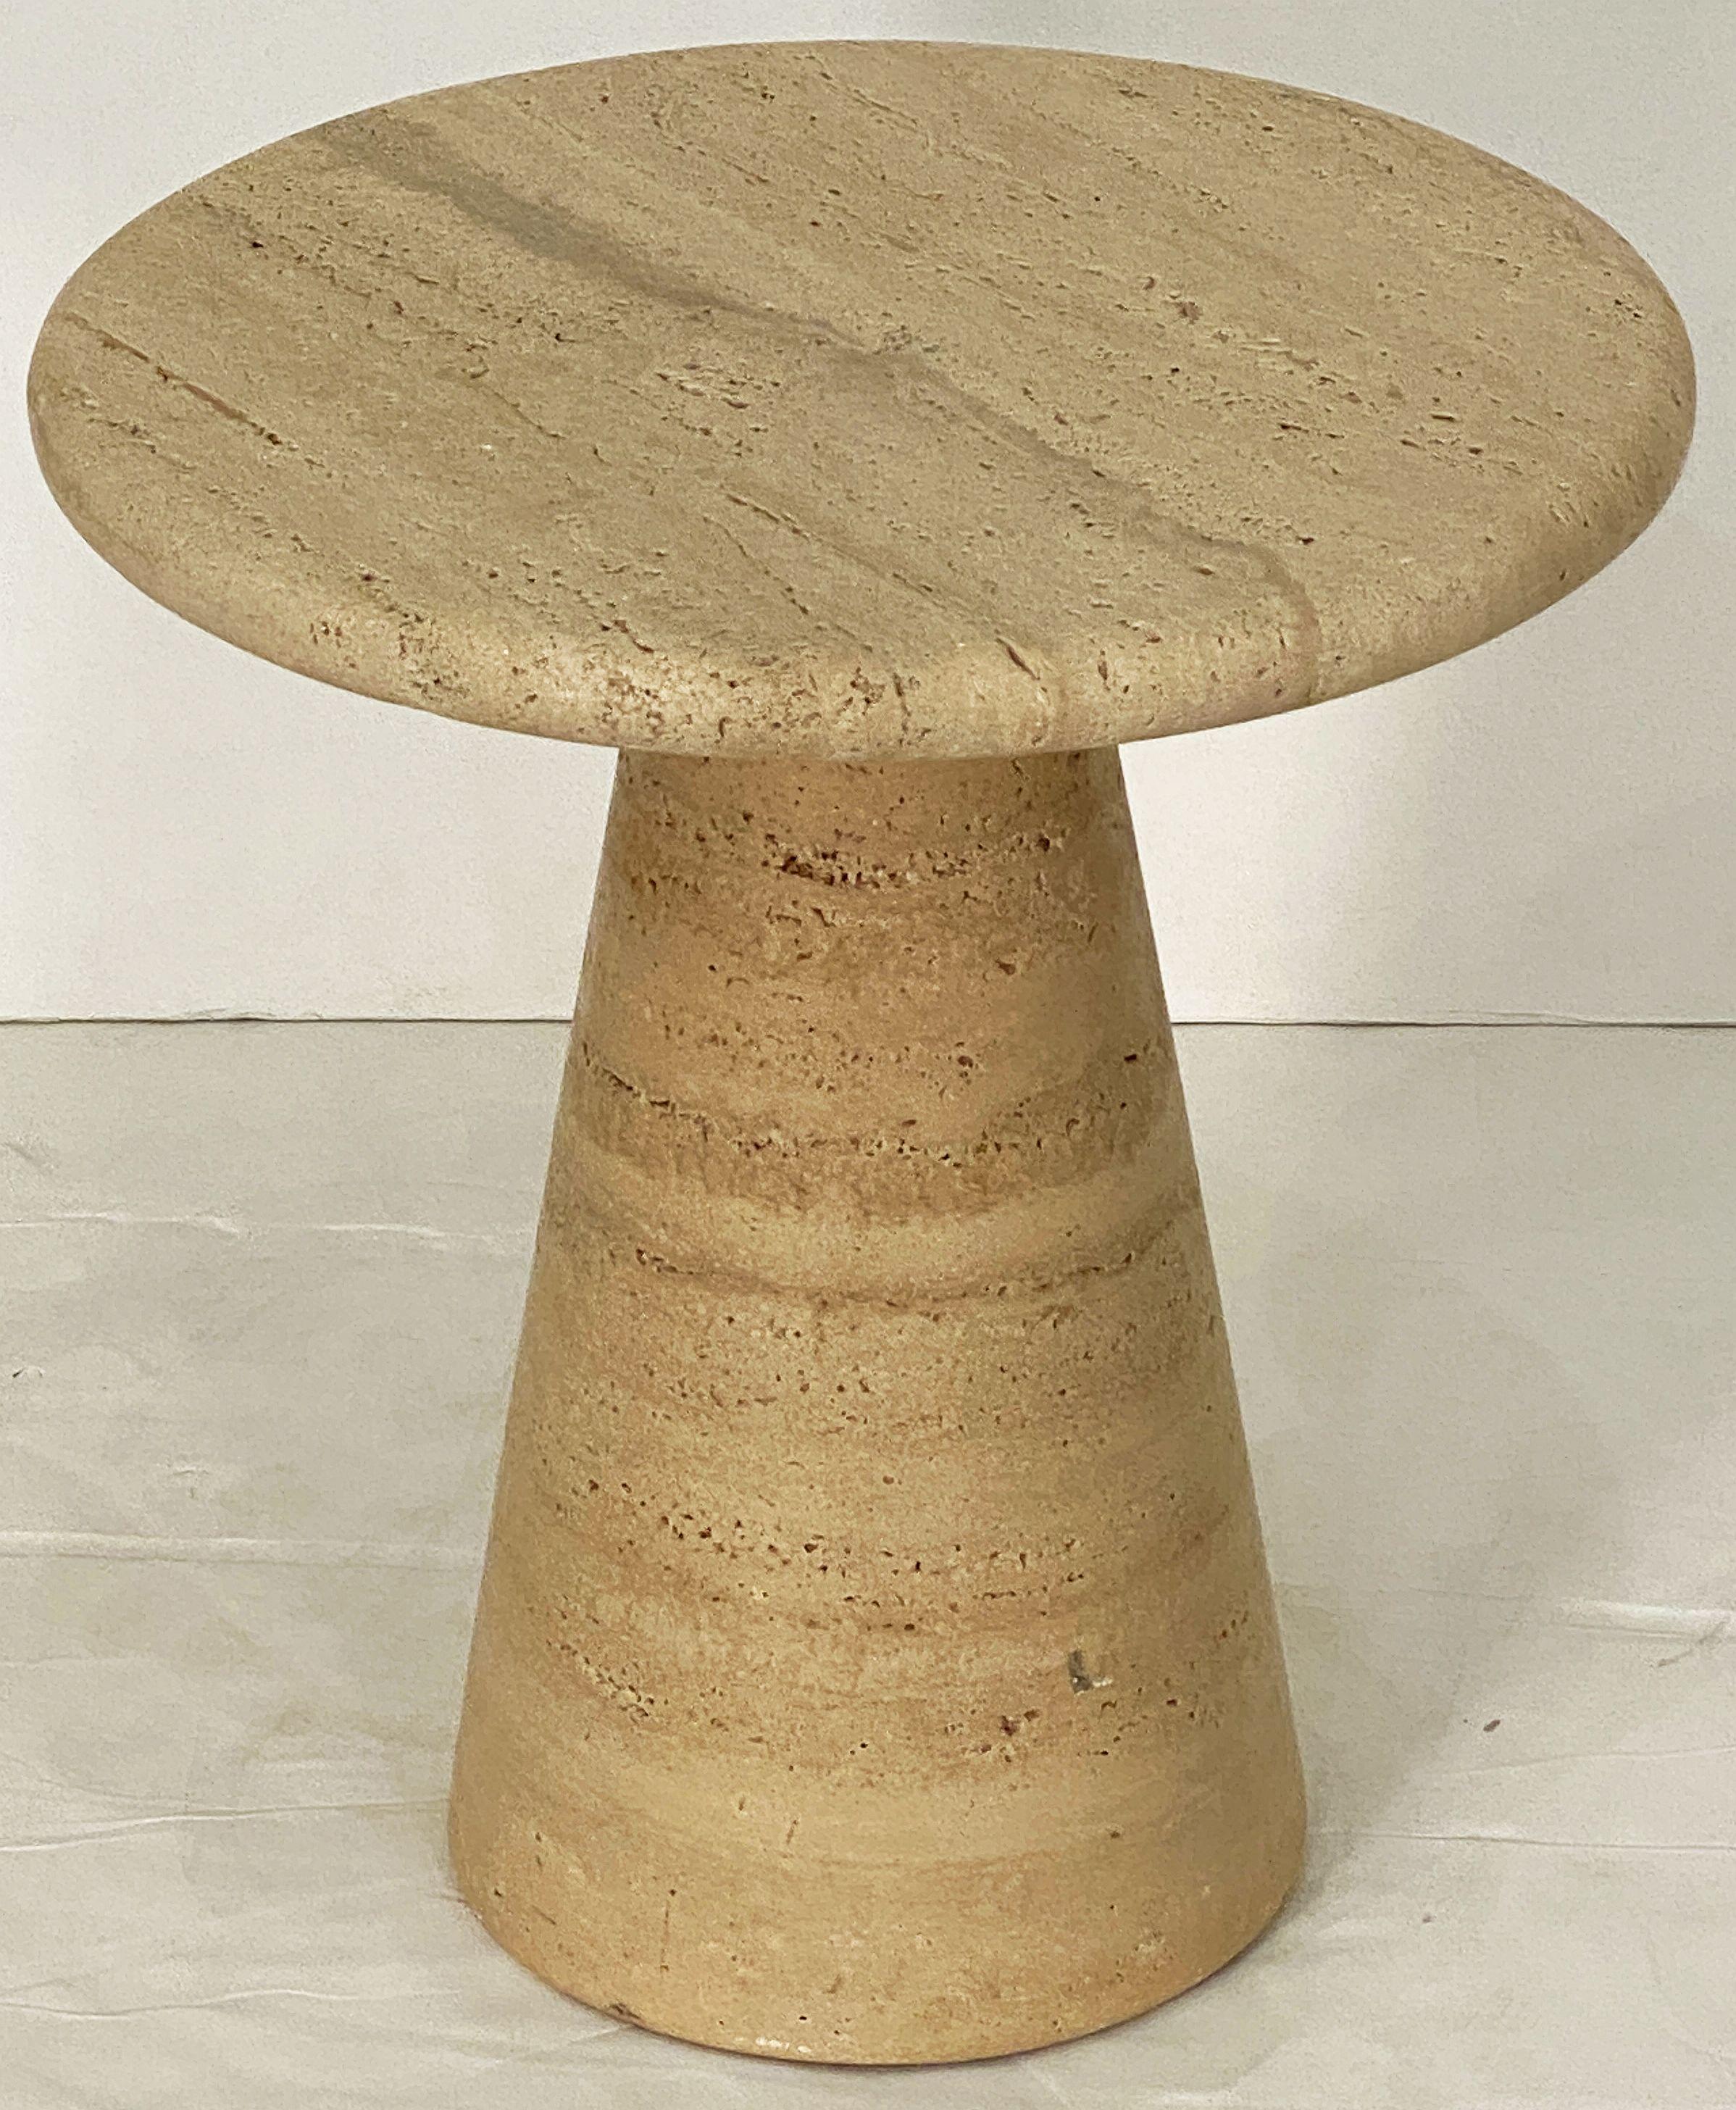 Modernist Conical Table of Travertine Stone from Italy (Four Available) For Sale 6